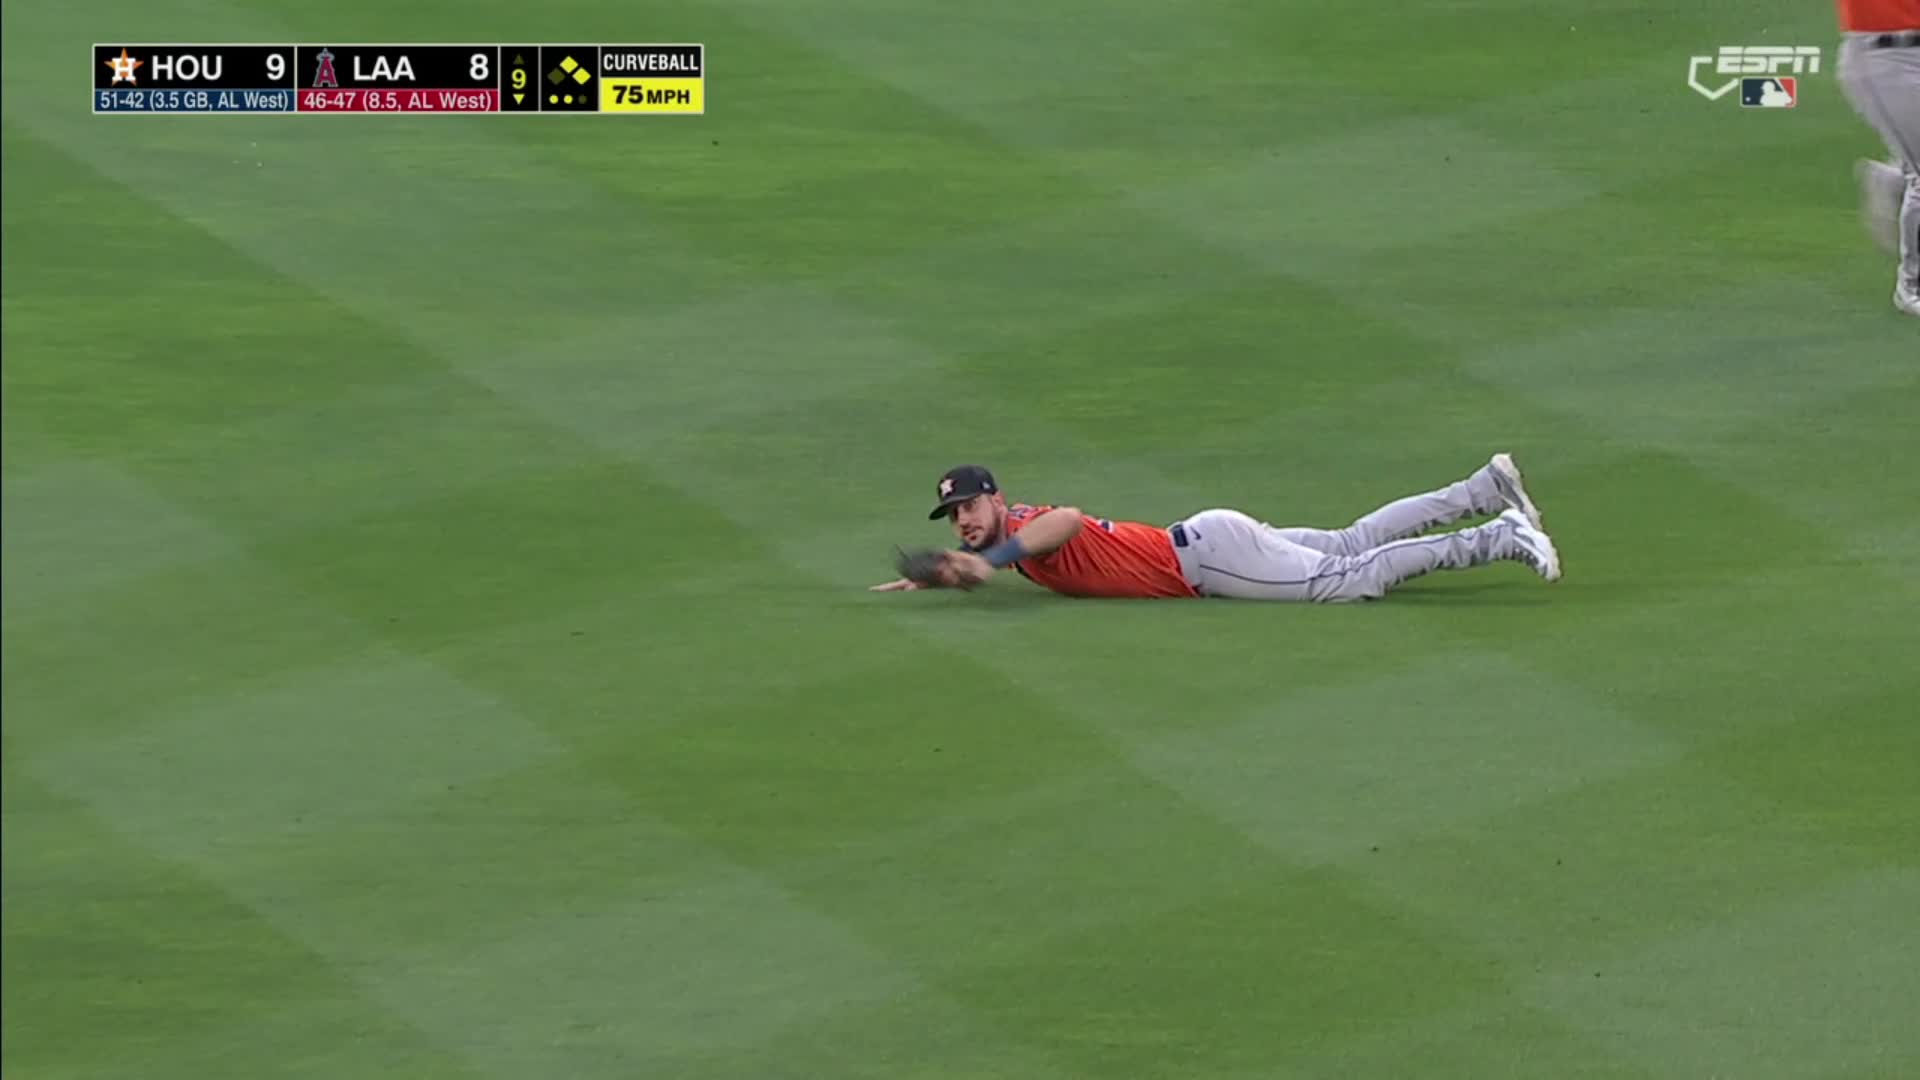 Kyle Tucker makes a diving game-winning catch for the final out to